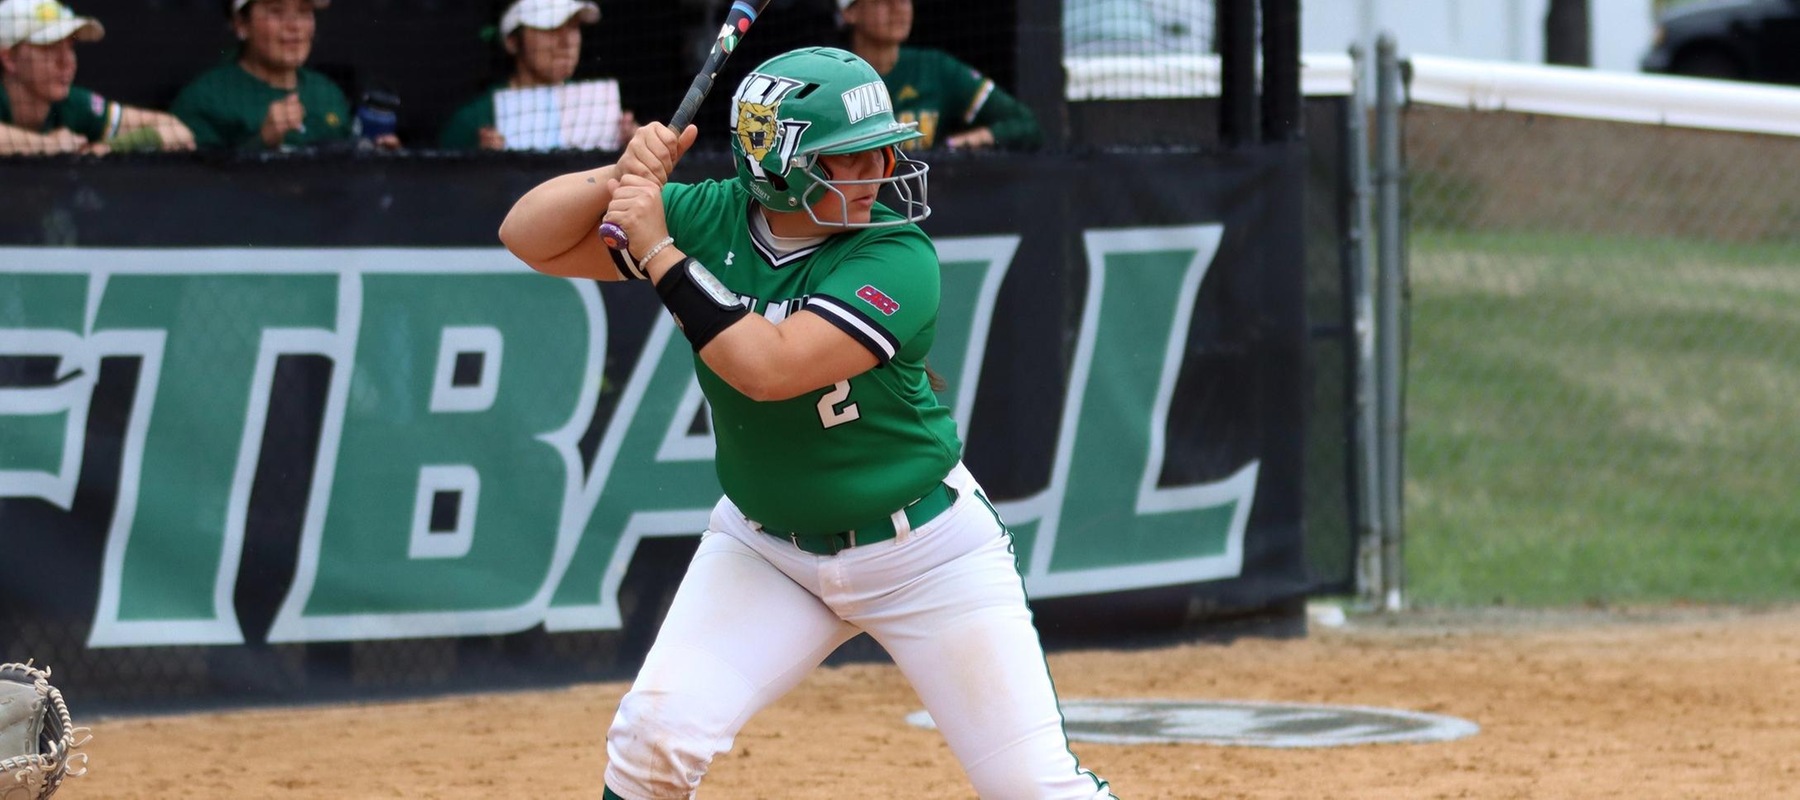 File photo of Lauren Lopez who went 3-for-4 with a double and two RBI in game two at West Chester. Copyright 2022; Wilmington University. All rights reserved. Photo by Dan Lauletta. March 31, 2022 vs. Felician.